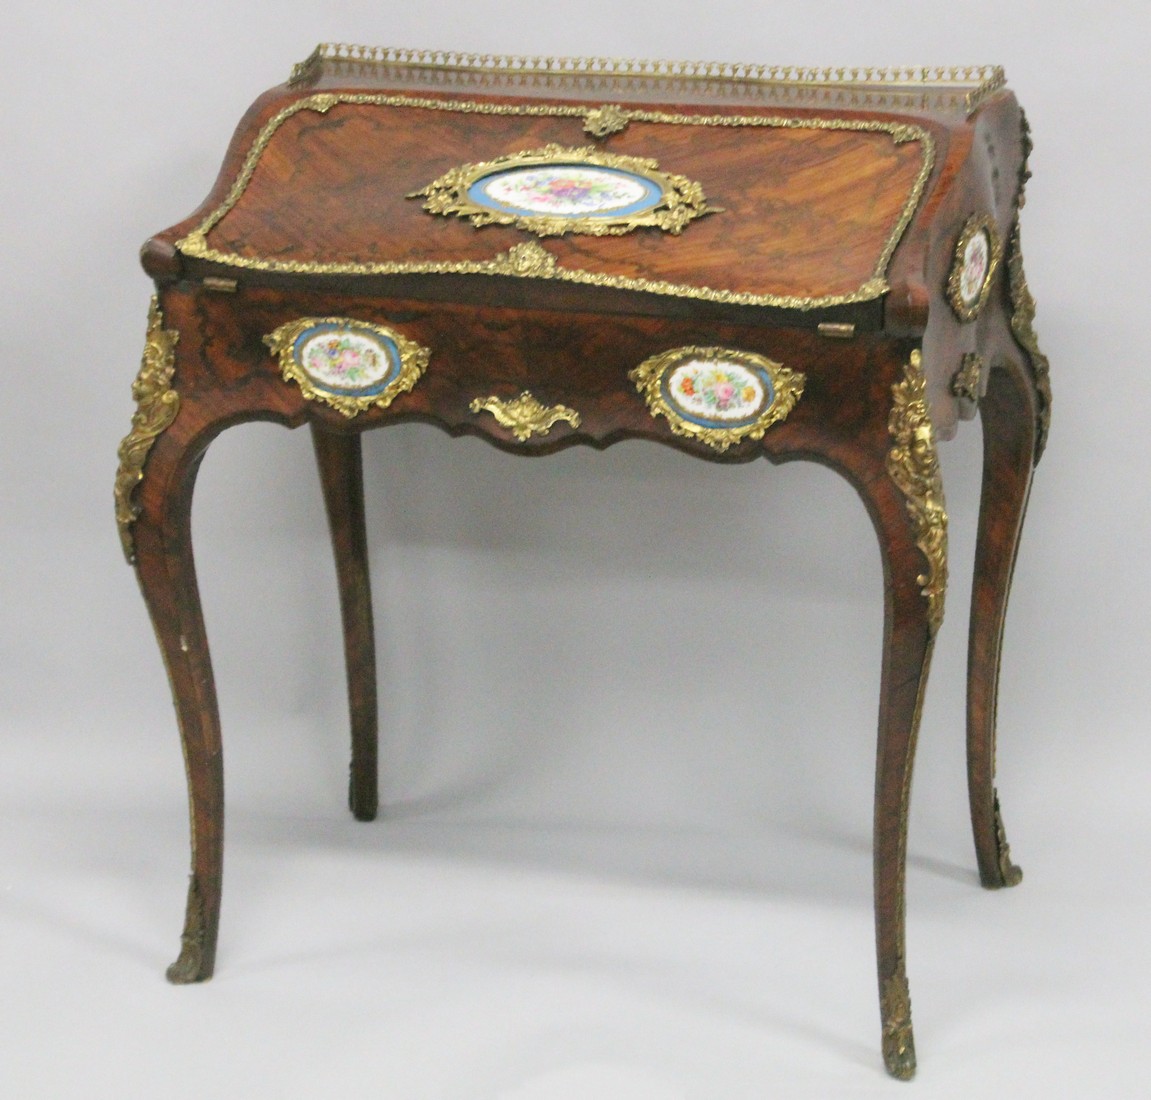 A SUPERB 19TH CENTURY LOUIS XVI STYLE KINGWOOD BUREAU with brass grill, ormolu mounts and inset with